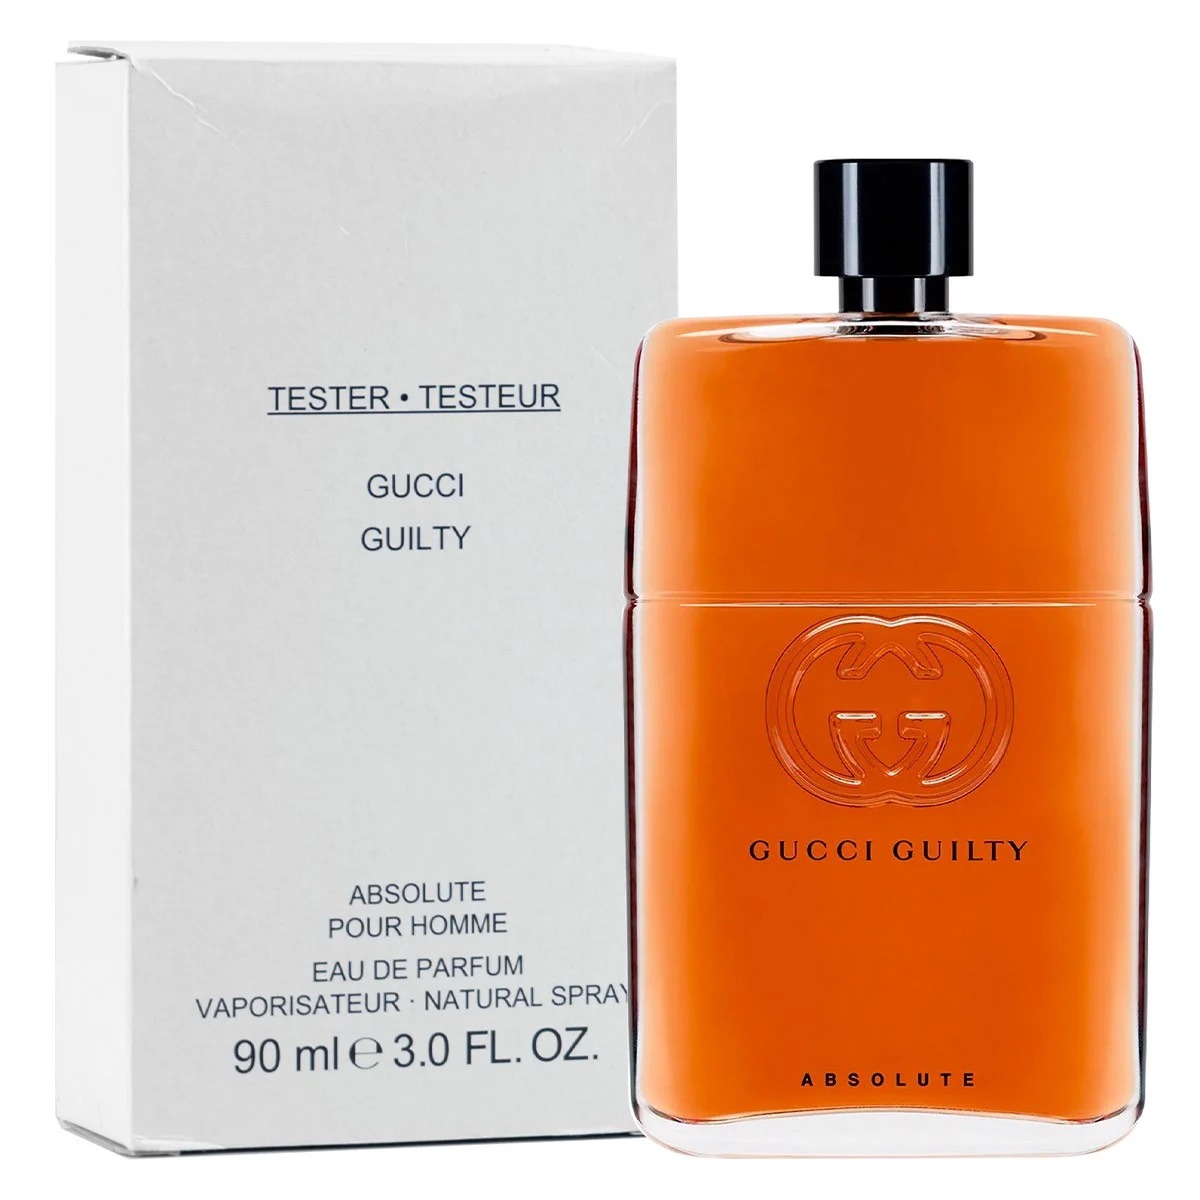 Gucci Guilty Absolute Pour Homme 3